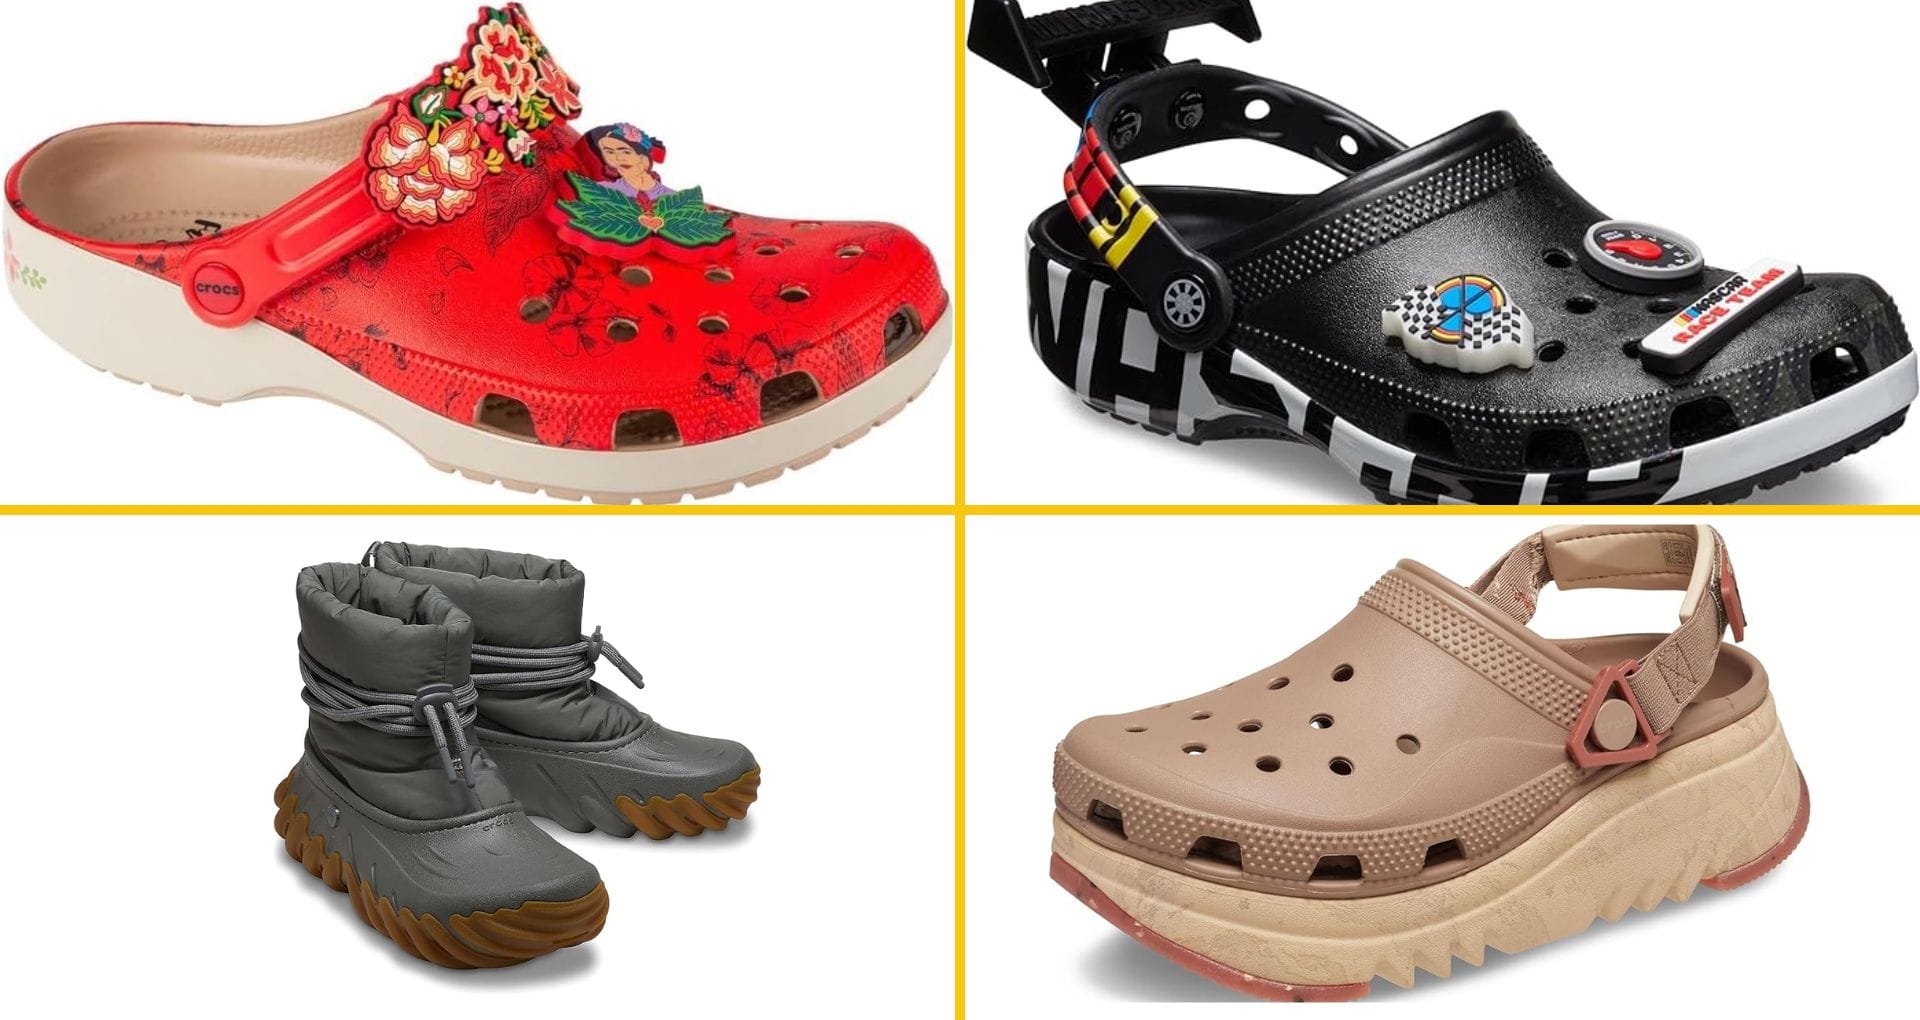 Four different styles of crocs shoes, slides, platforms and boots